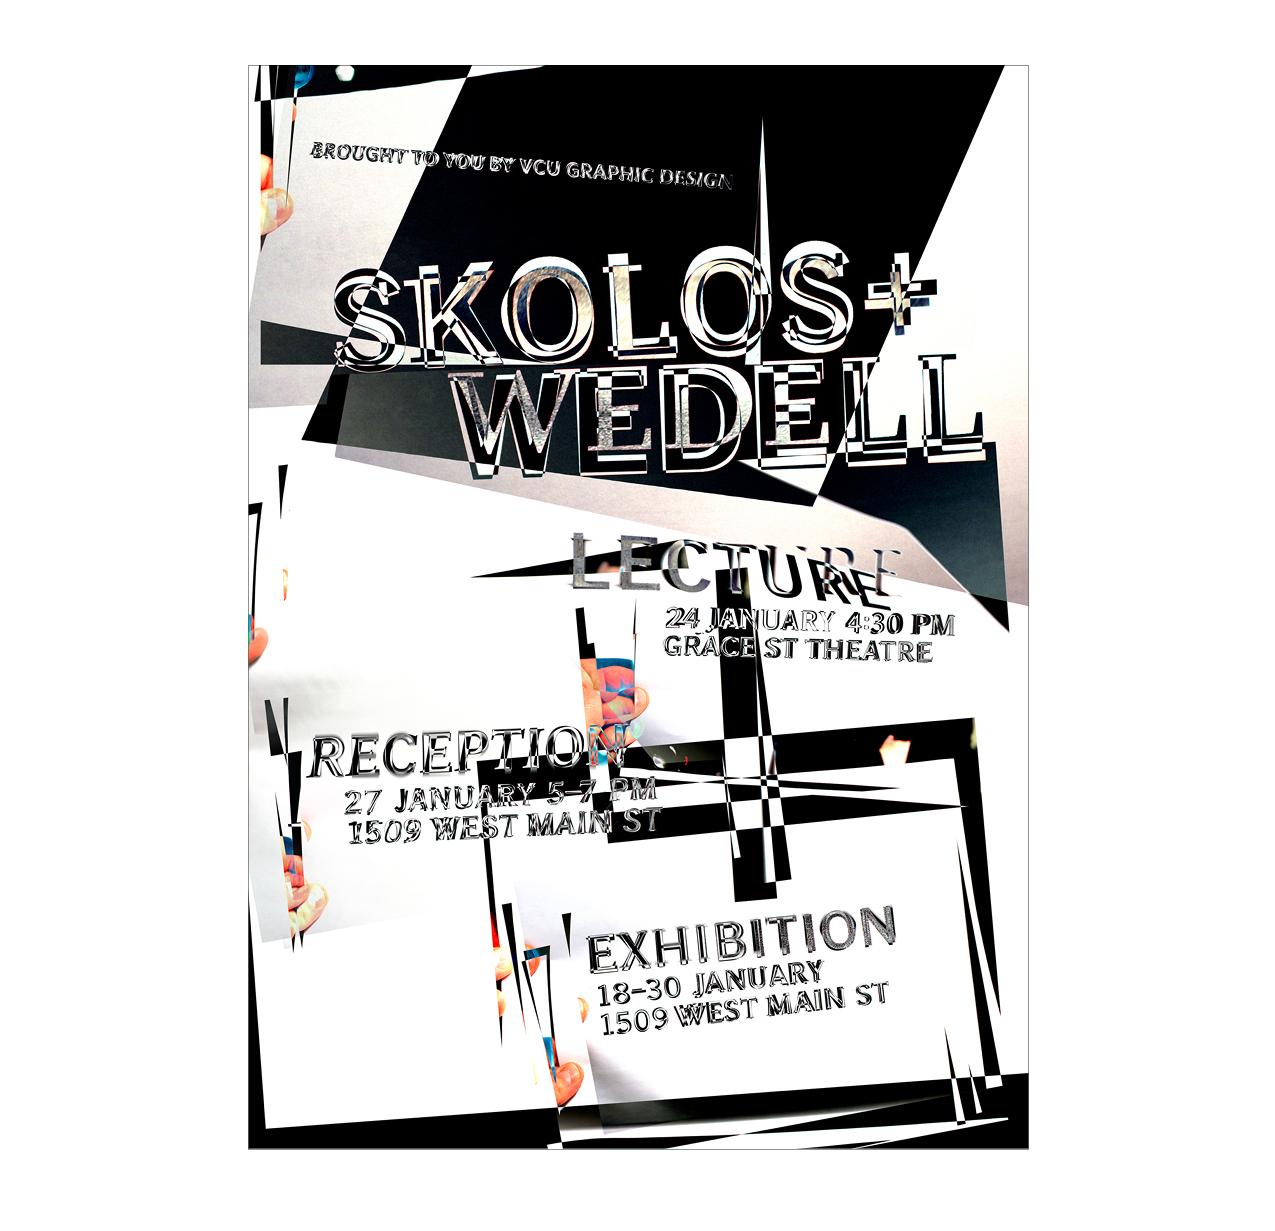 A poster advertising a lecture and exhibition by Skolos+Wedell.